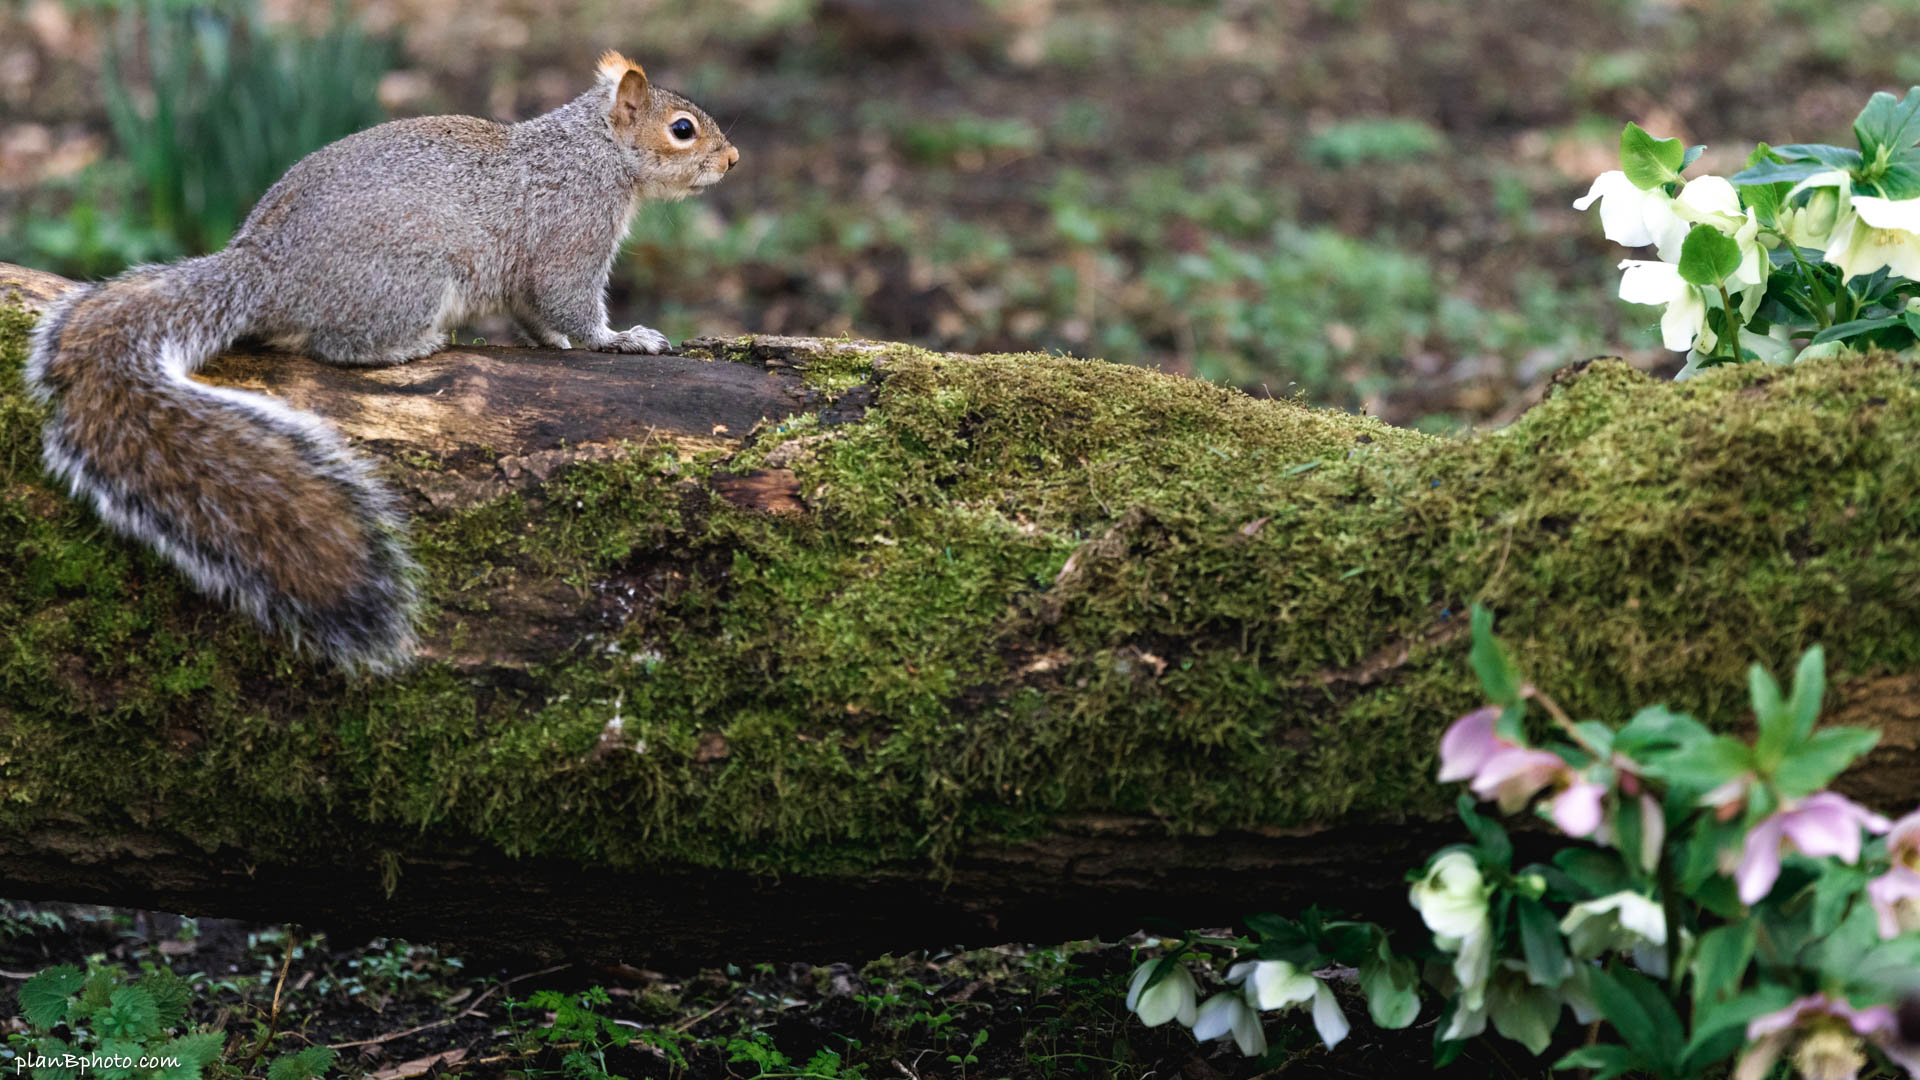 Cute grey squirrel with puffy tail is sitting on a moss covered tree trunk in a park looking at beautiful flowers